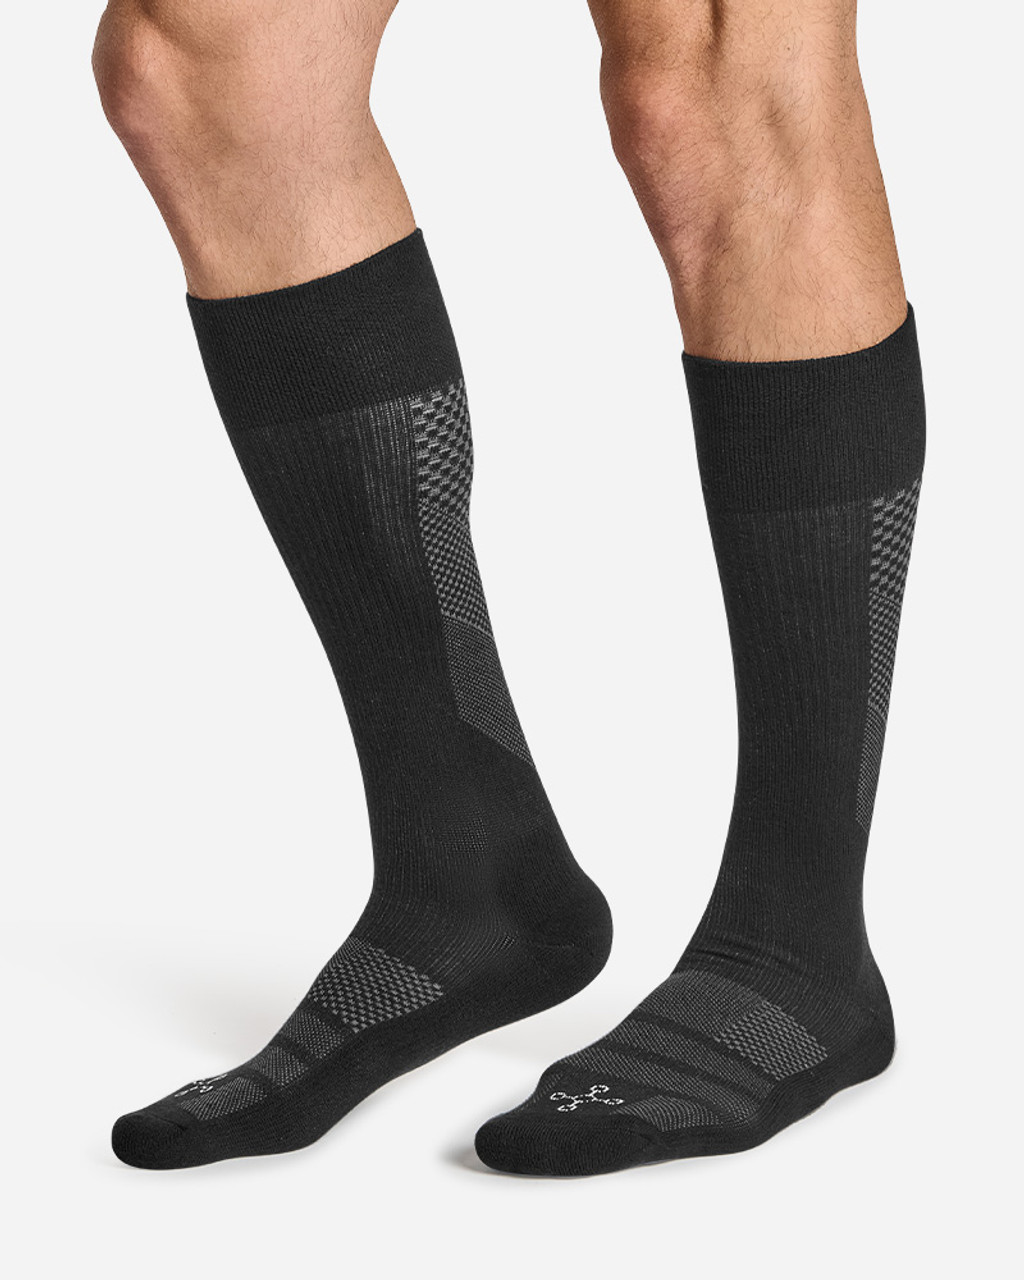 Best compression socks 2023: Improve circulation and reduce